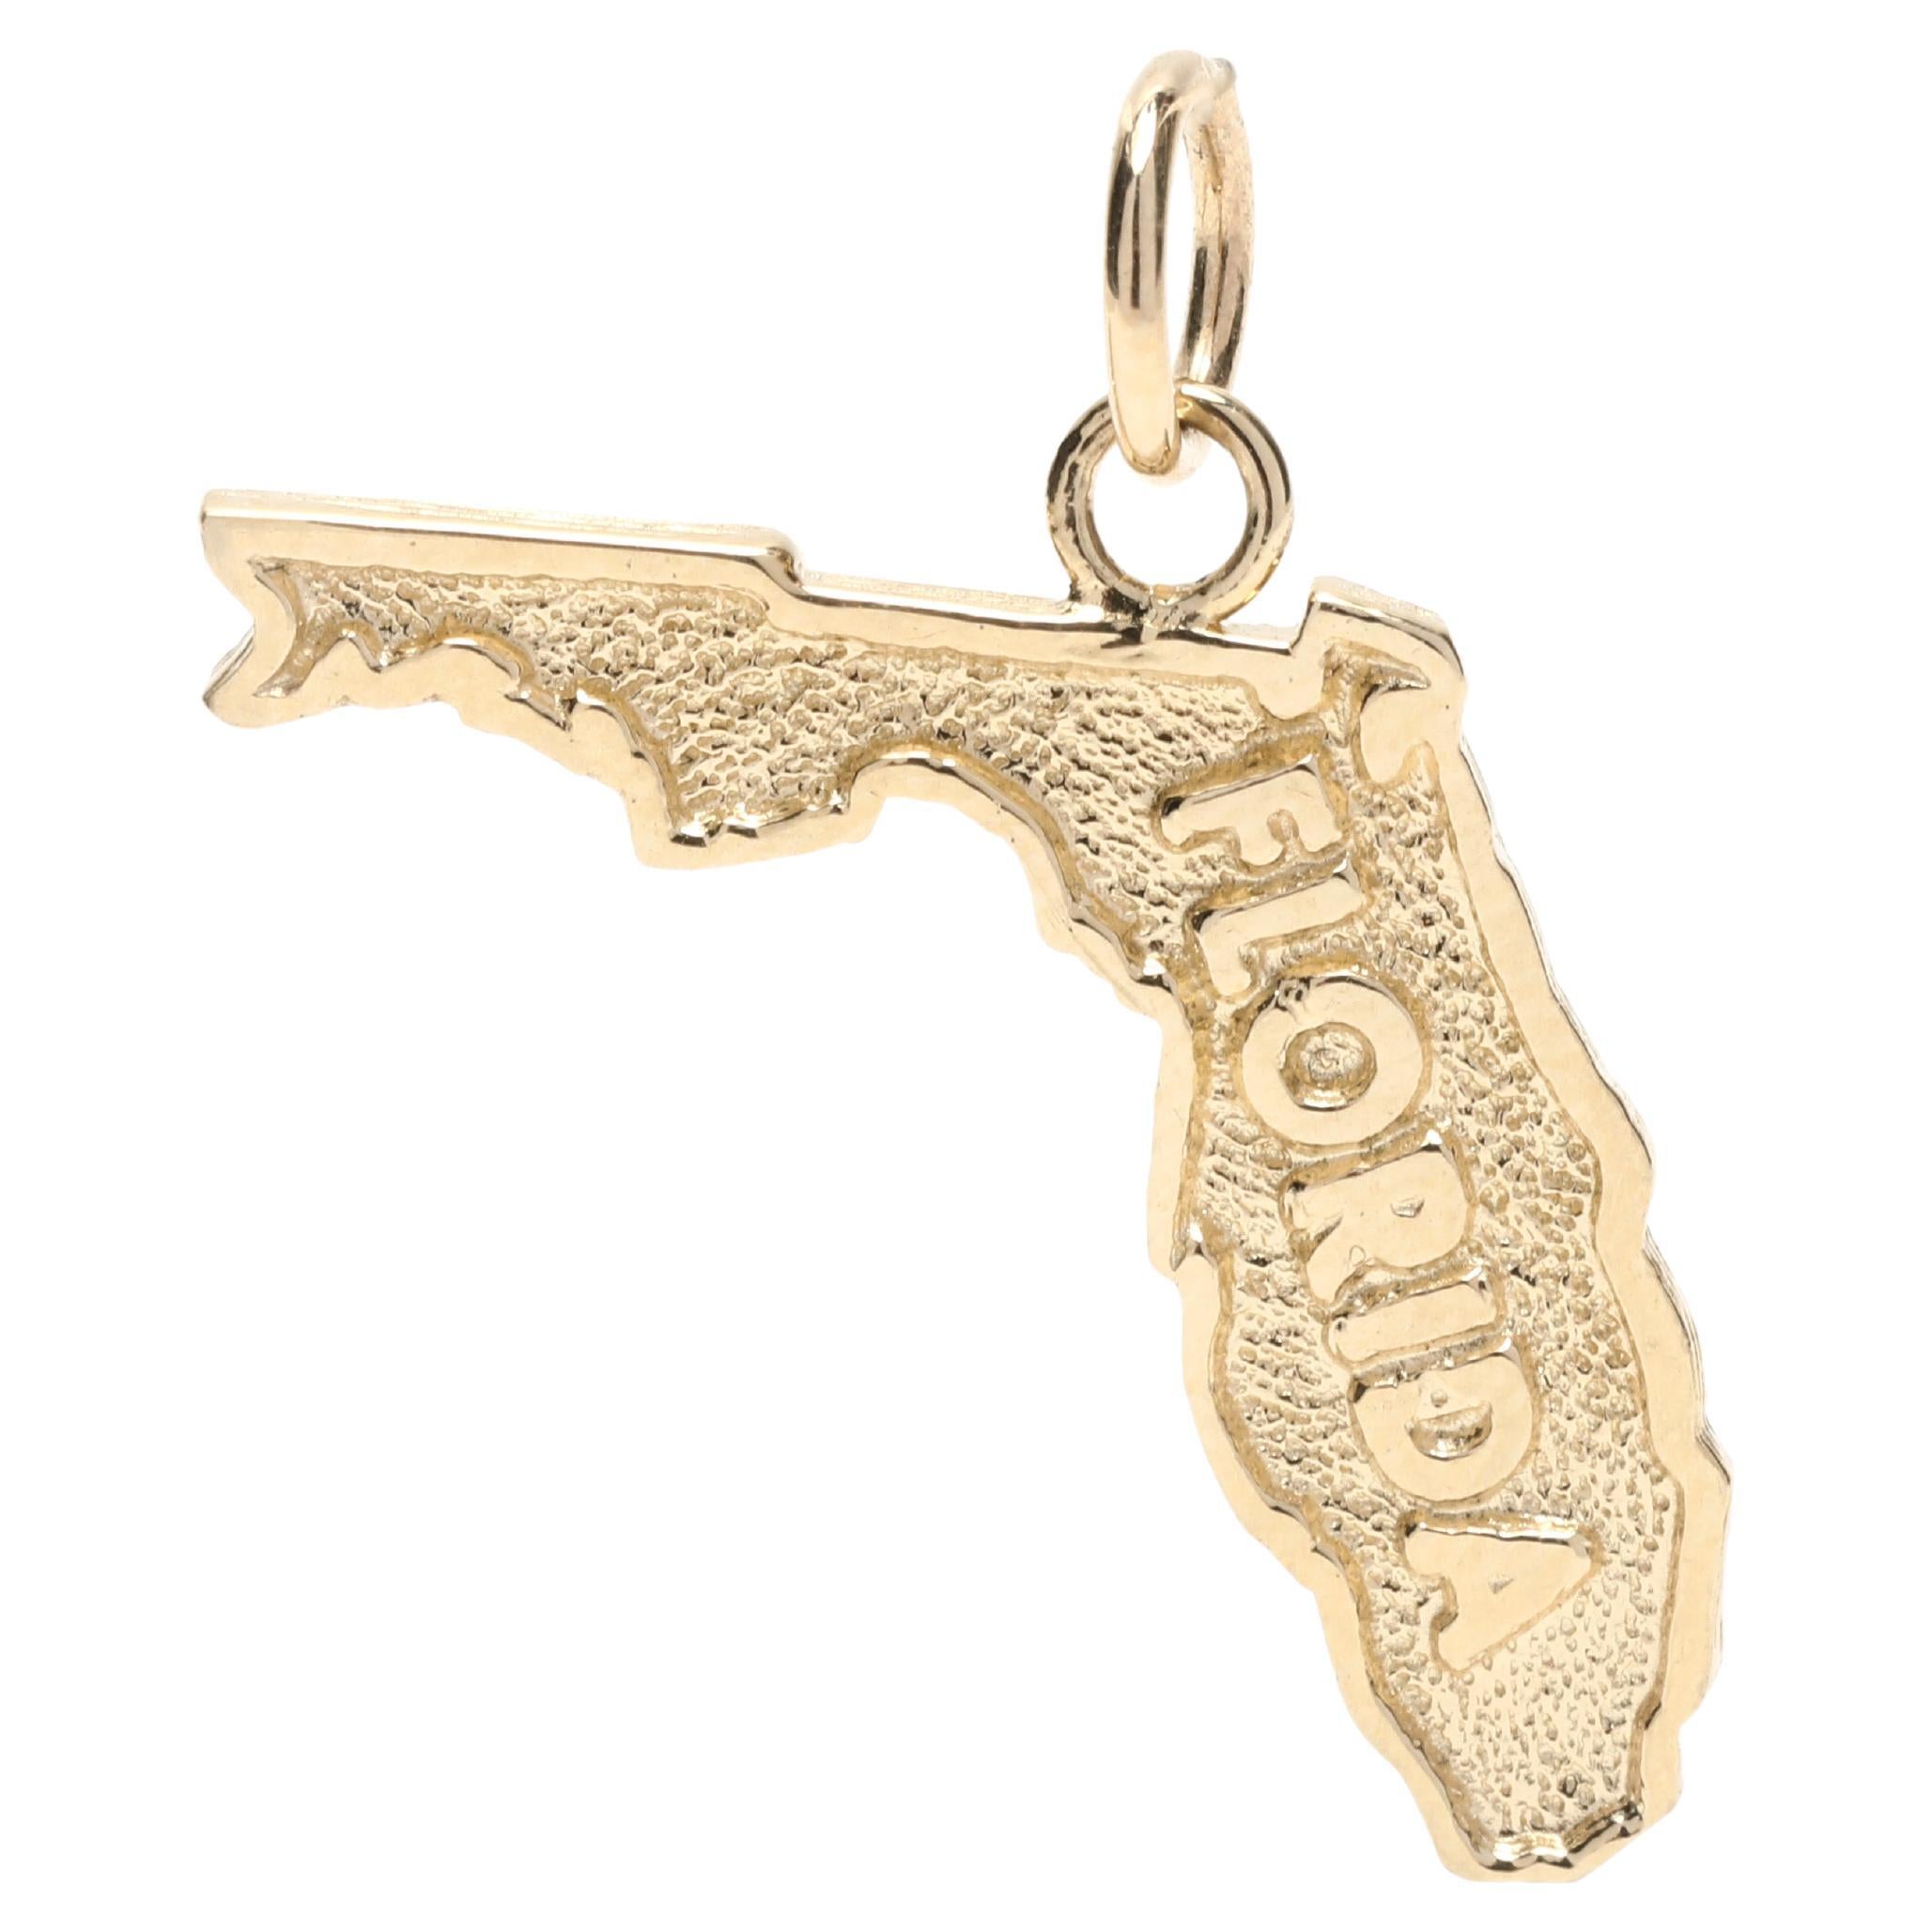 Solid Gold Florida State Charm, 14k Yellow Gold, Travel Florida